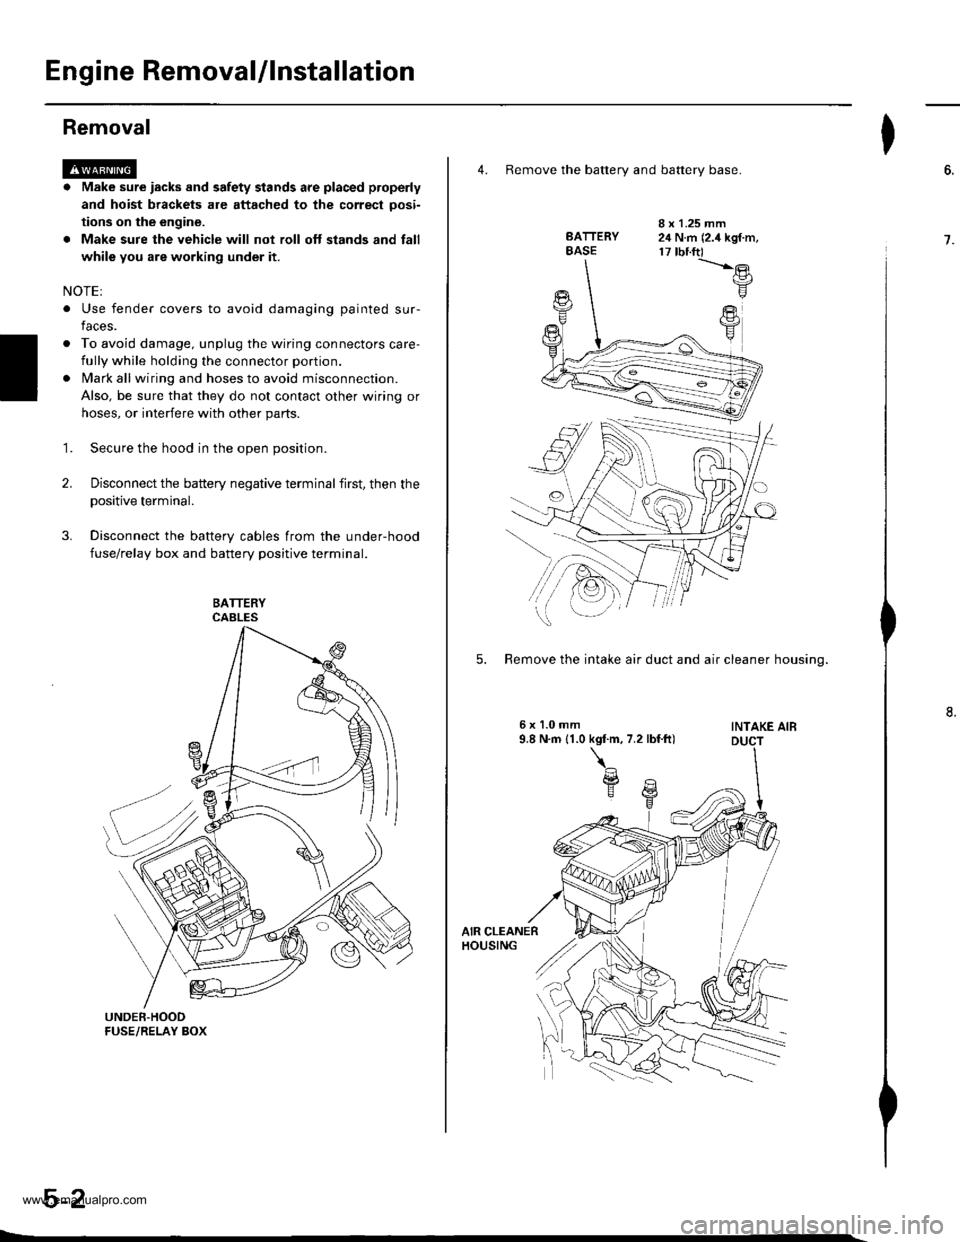 HONDA CR-V 2000 RD1-RD3 / 1.G Workshop Manual 
Engine RemovaUlnstallation
Removal
@a Make sure iacks and safety stands are placed properly
and hoist brackets are attached to the correct oosi-
tions on the engine.
. Make sure the vehicle will not 